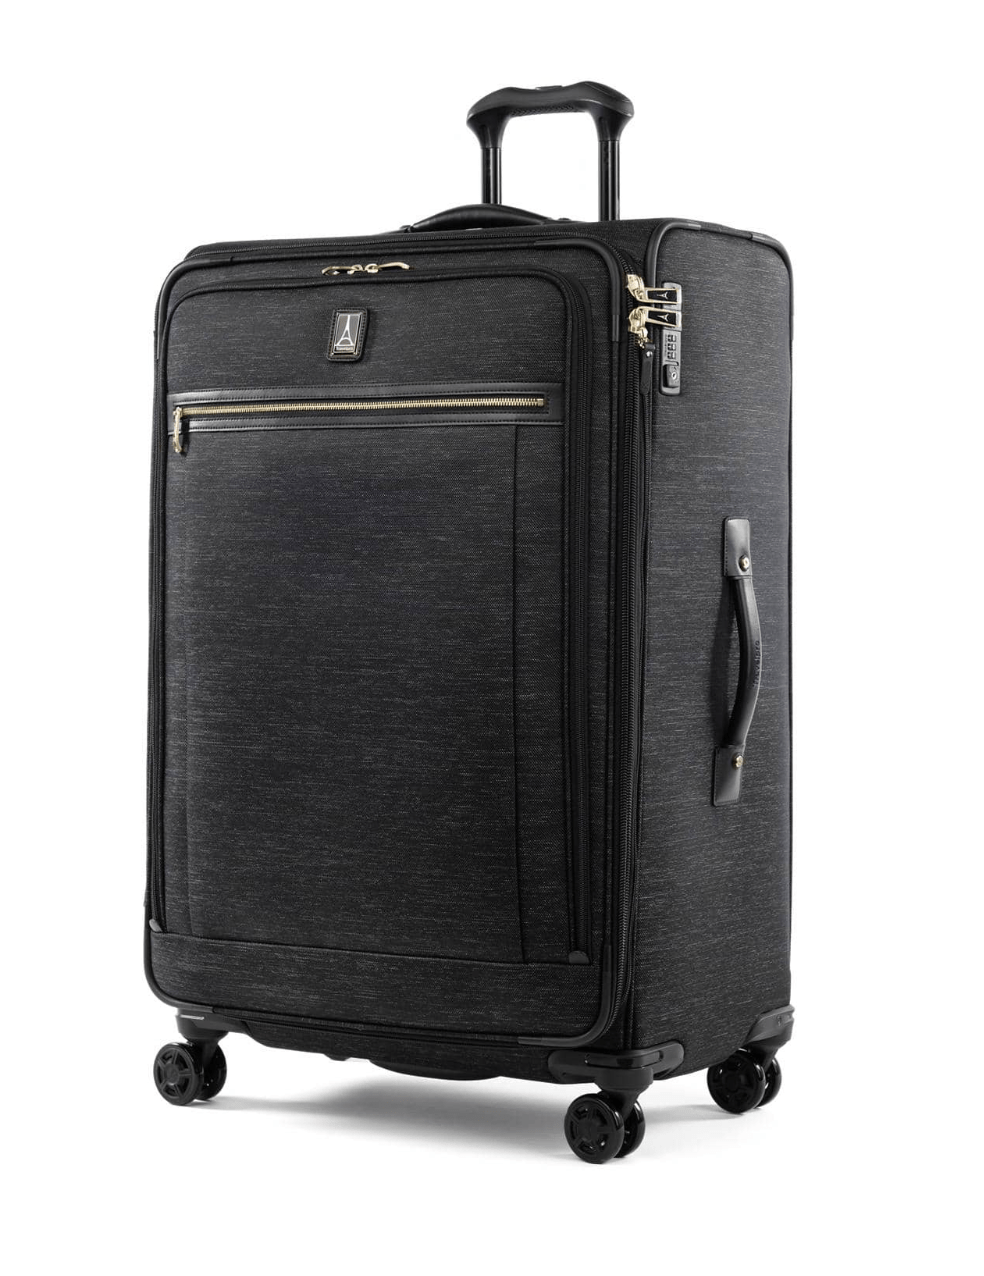 Travelpro Platinum Elite 29 Inch Expandable Spinner Luggage - Intrigue Black